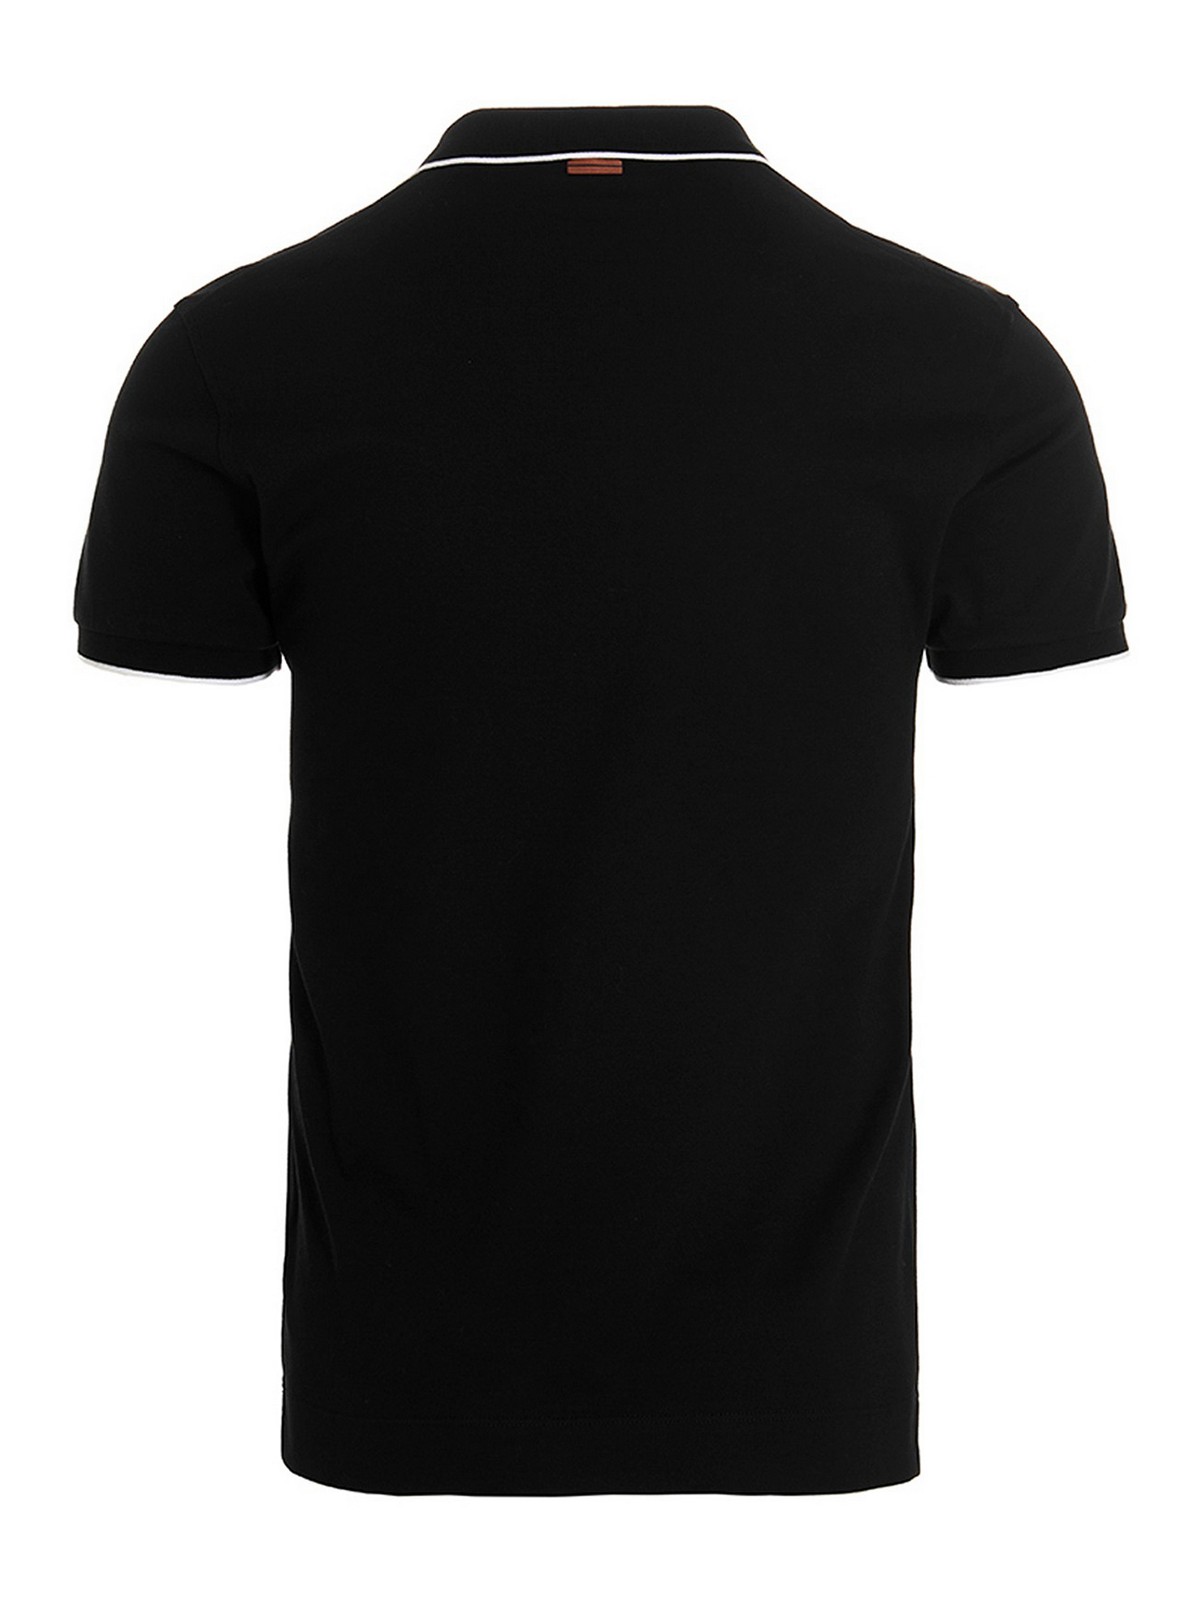 Shop Zegna Embroidered Logo Polo Shirt In Black